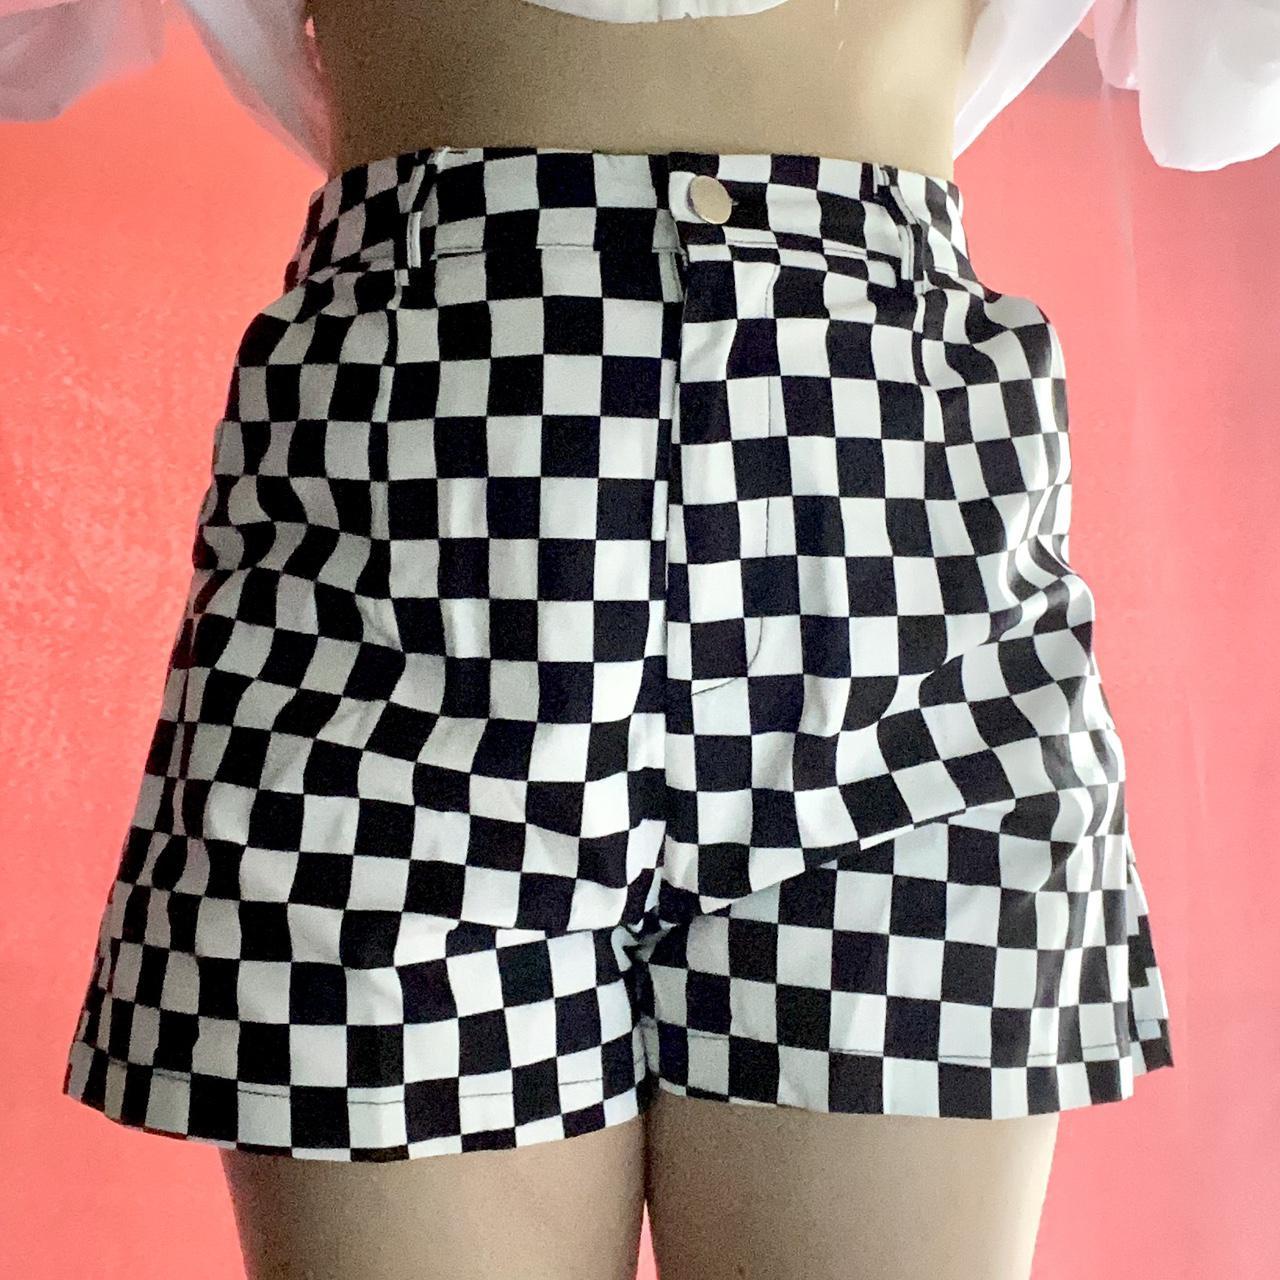 Product Image 2 - TRADE POST Checker Pattern Shorts

[CONDITION]
NWT;